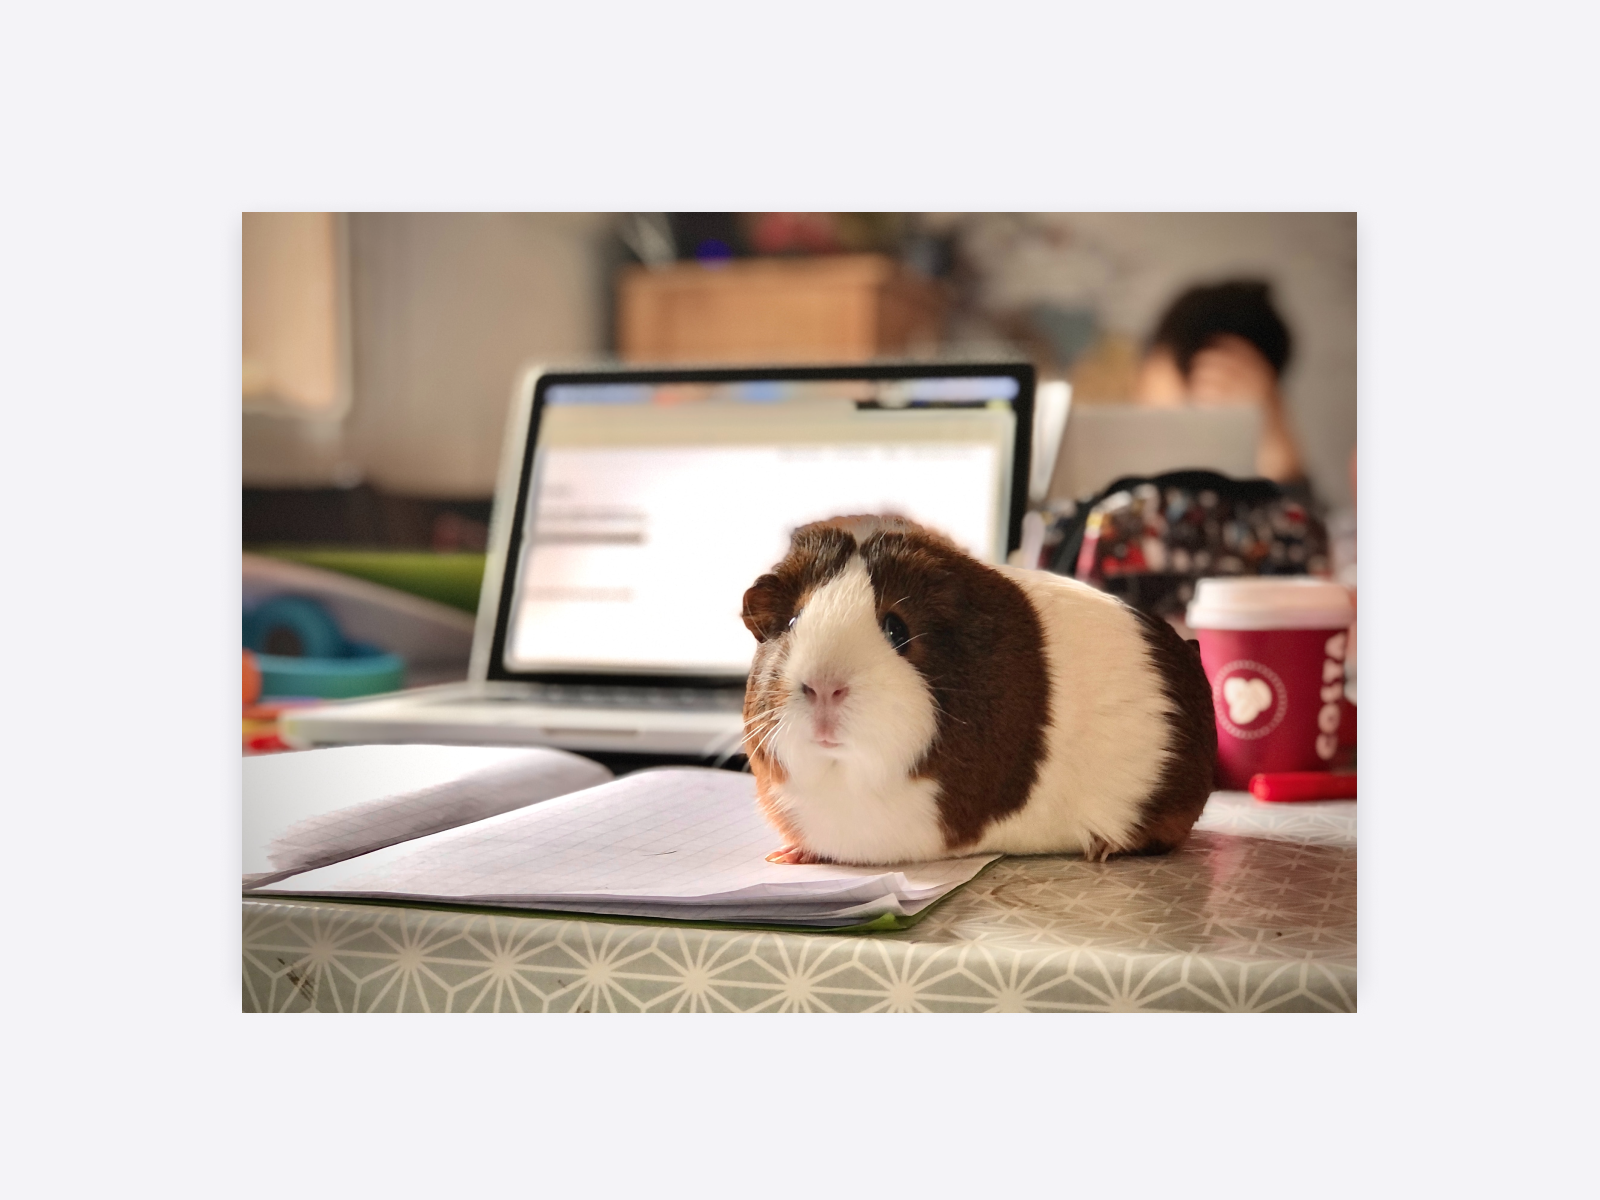 A guinea pig standing in front of a laptop.